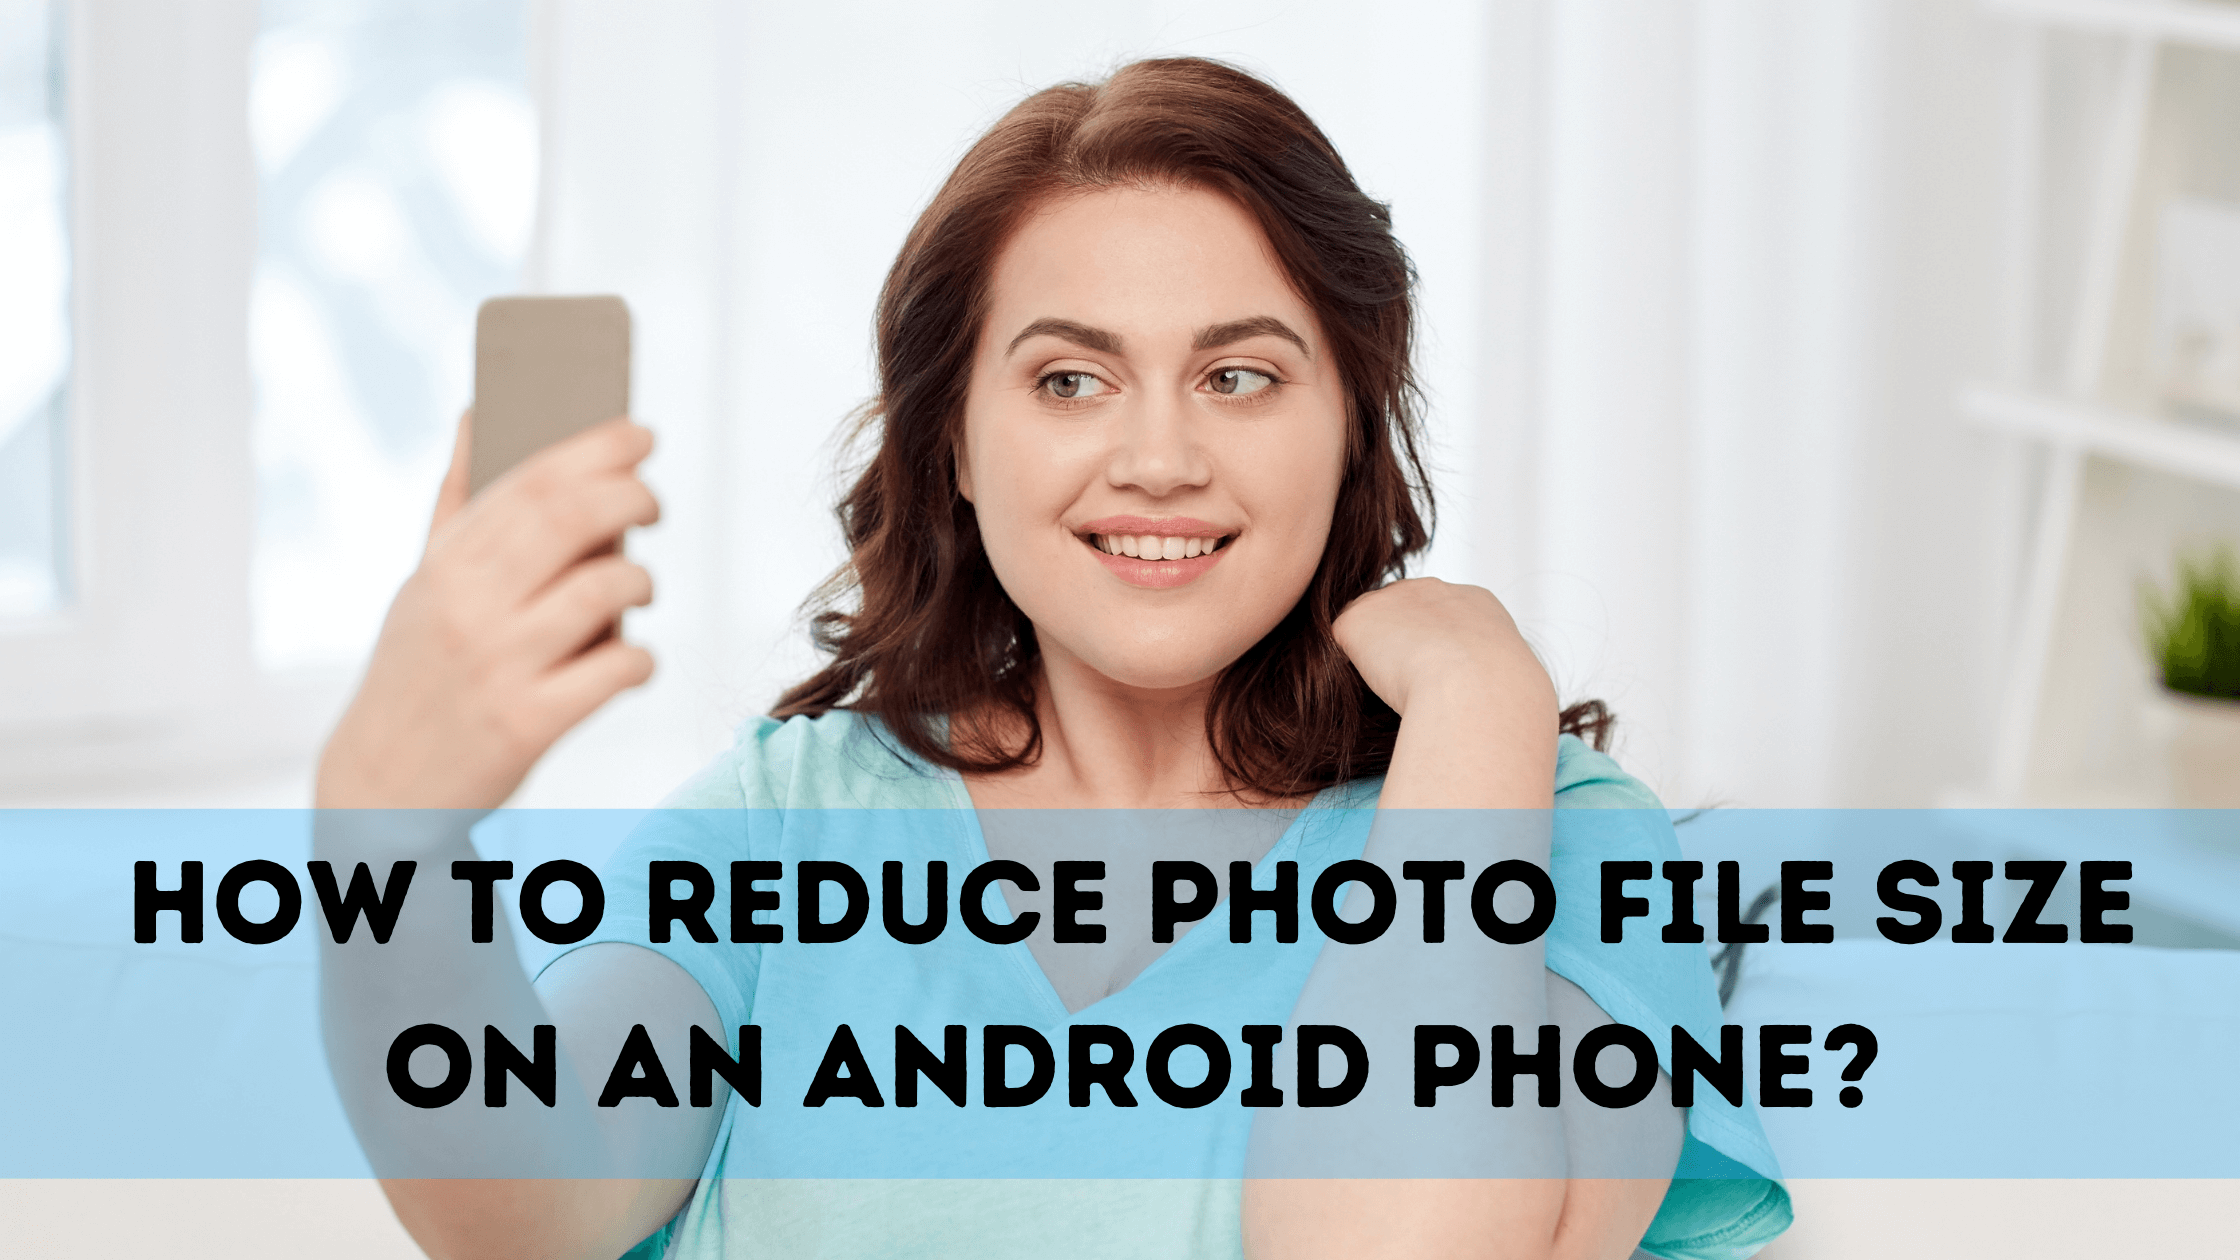 How to reduce photo file size on an android phone